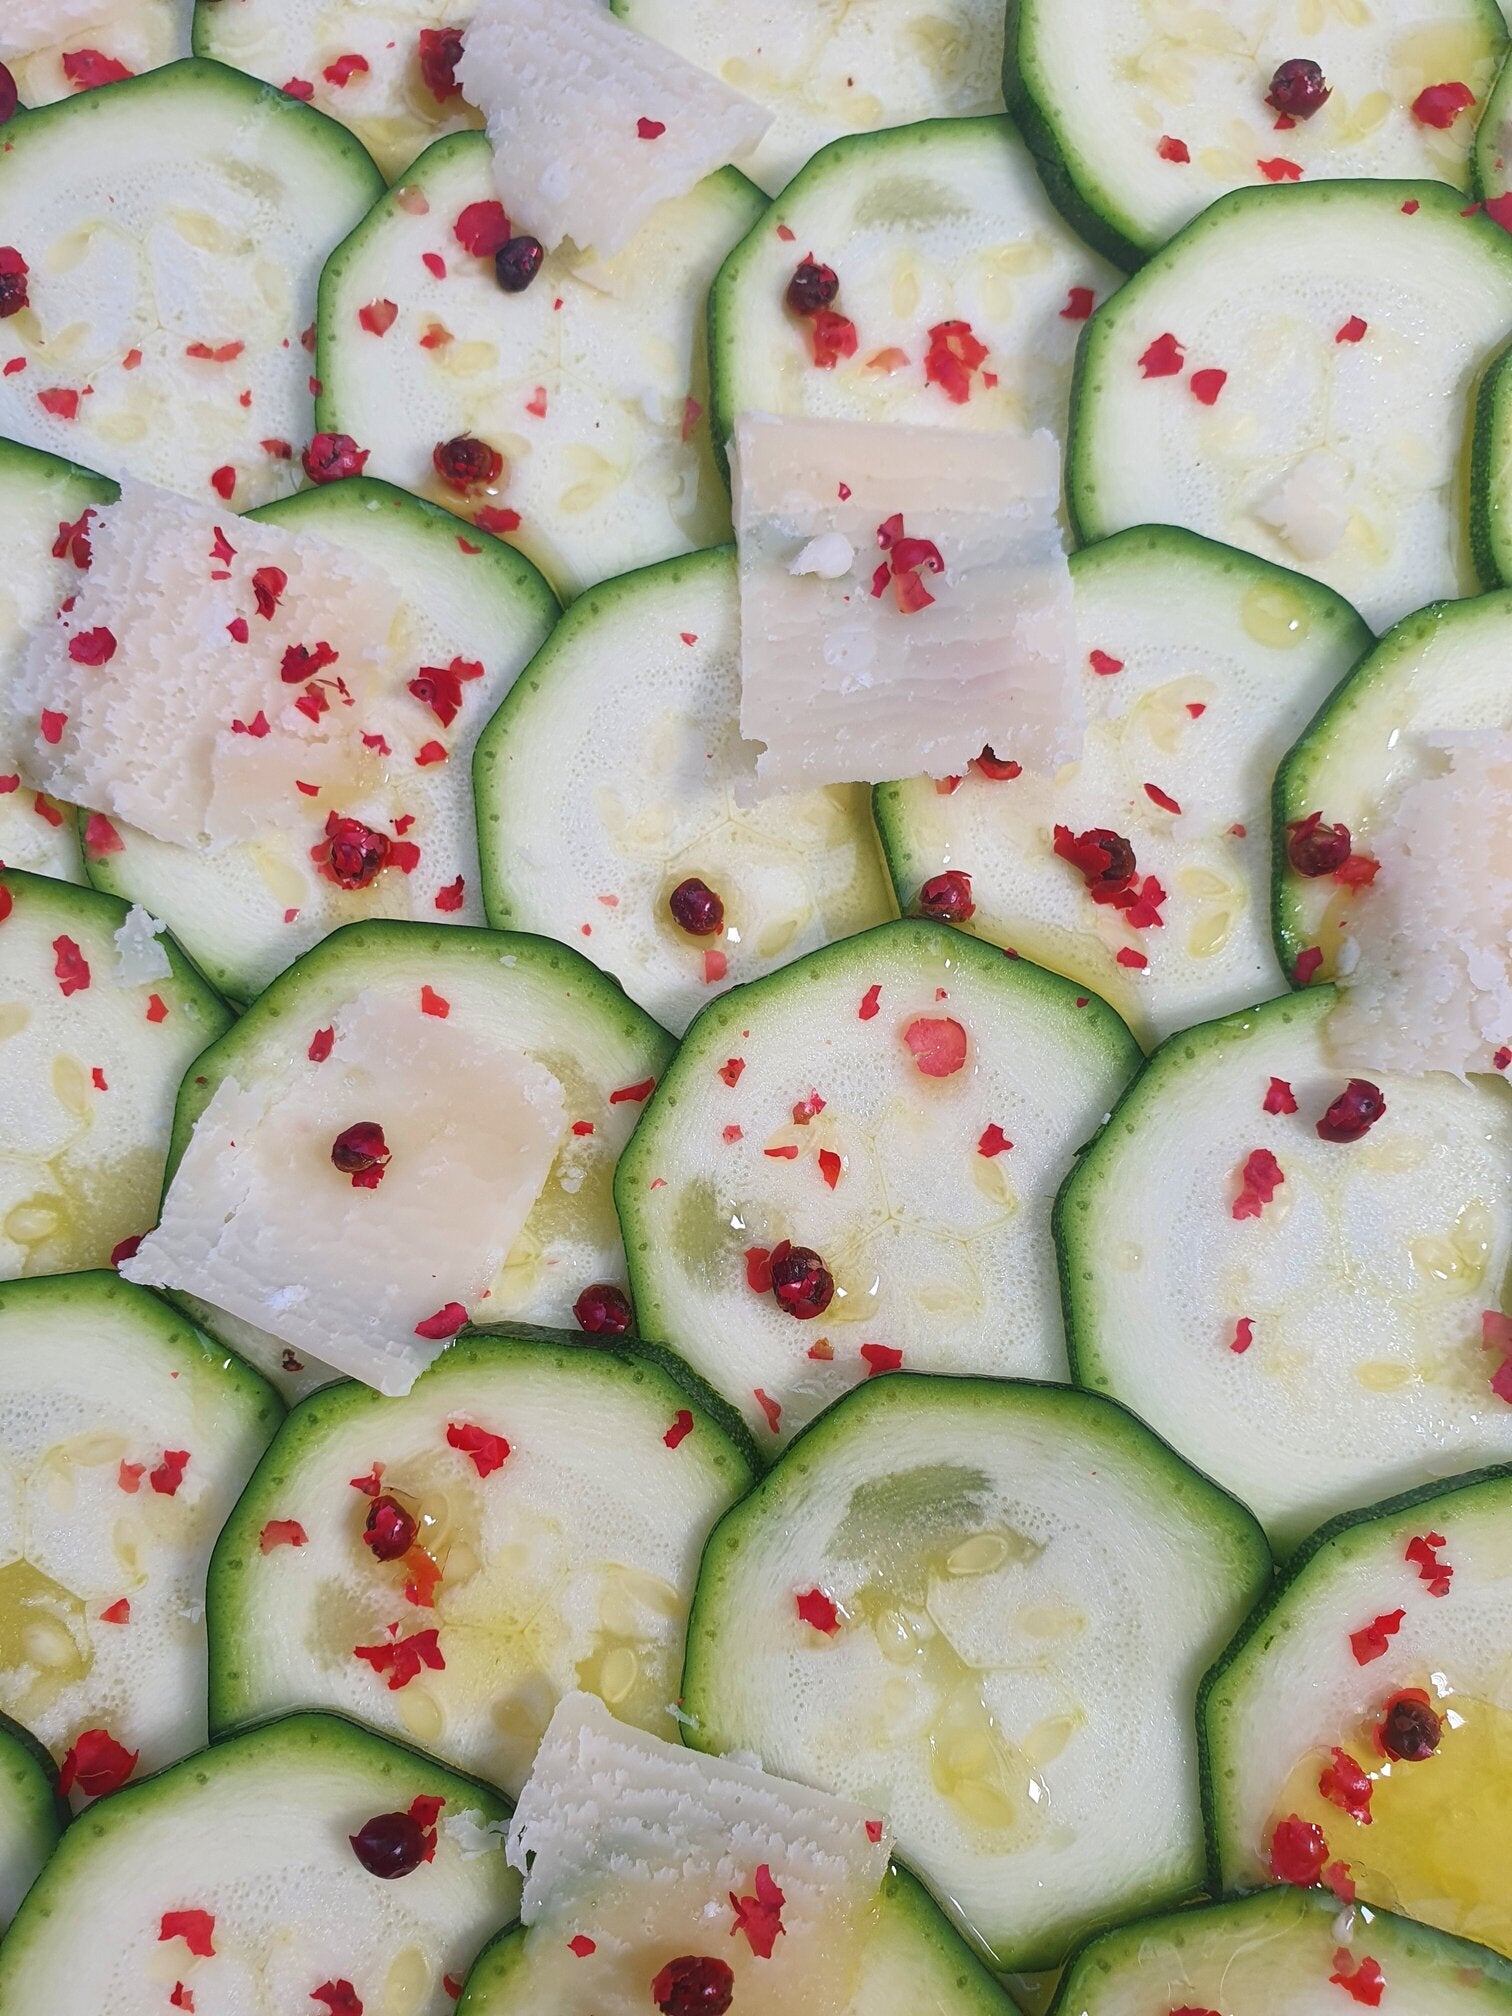 Courgette carpaccio with extra virgin olive oil